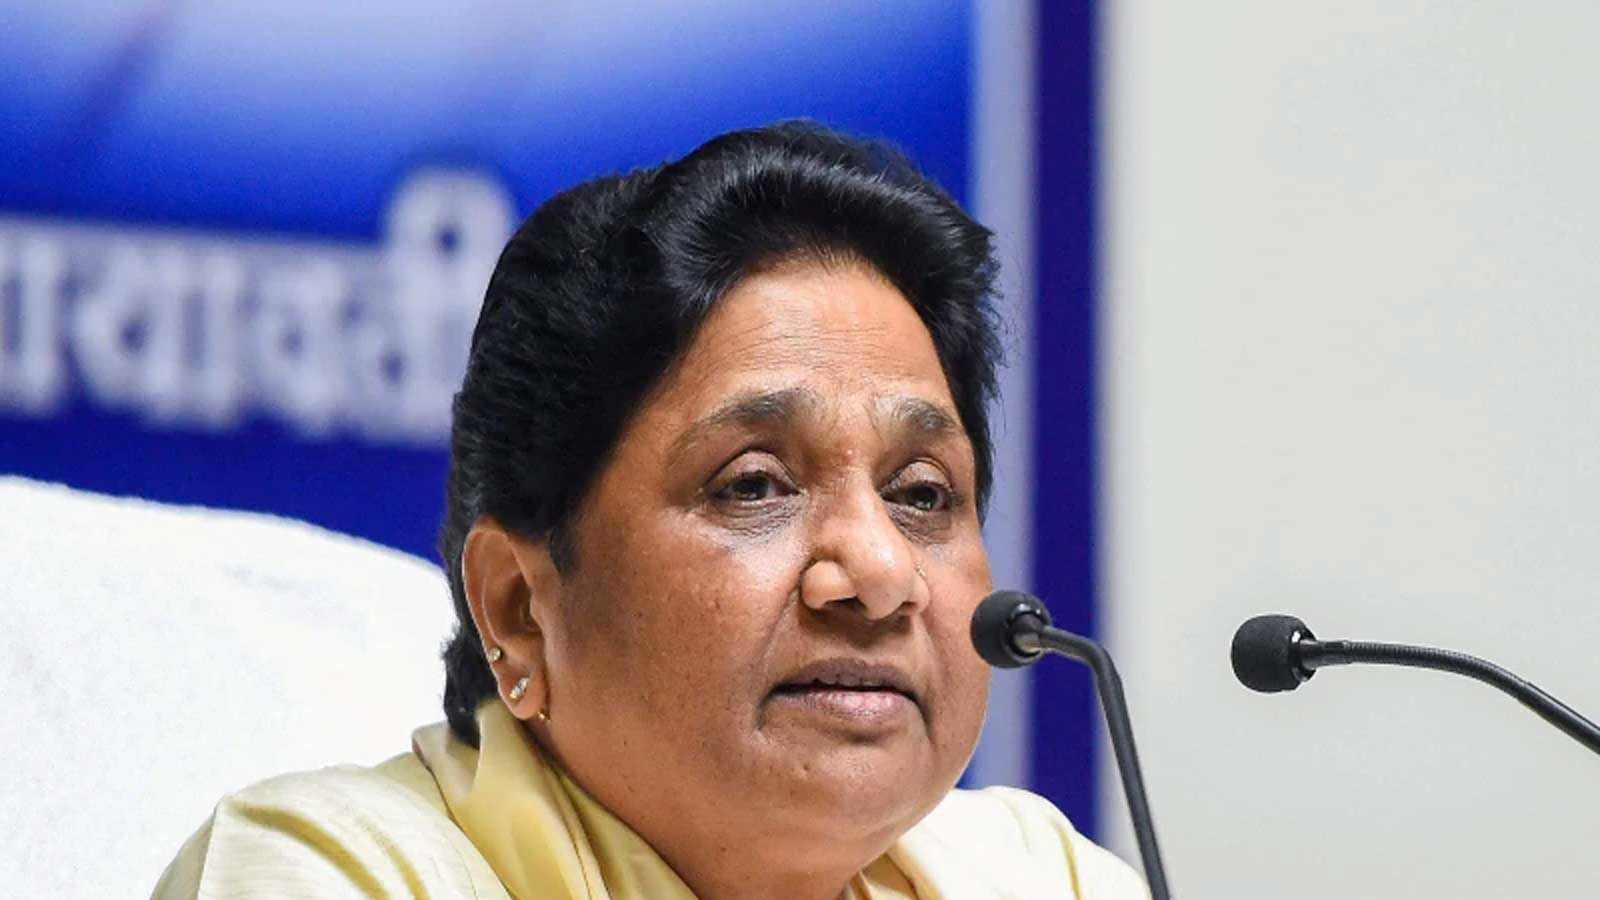 up assembly election 2022 bsp supremo mayawati likely to expel mukhtar  ansari and his brother afzal ansari from party-UP Assembly Election तो मुख्तार  अंसारी और उनके सांसद भाई अफजाल को बाहर का